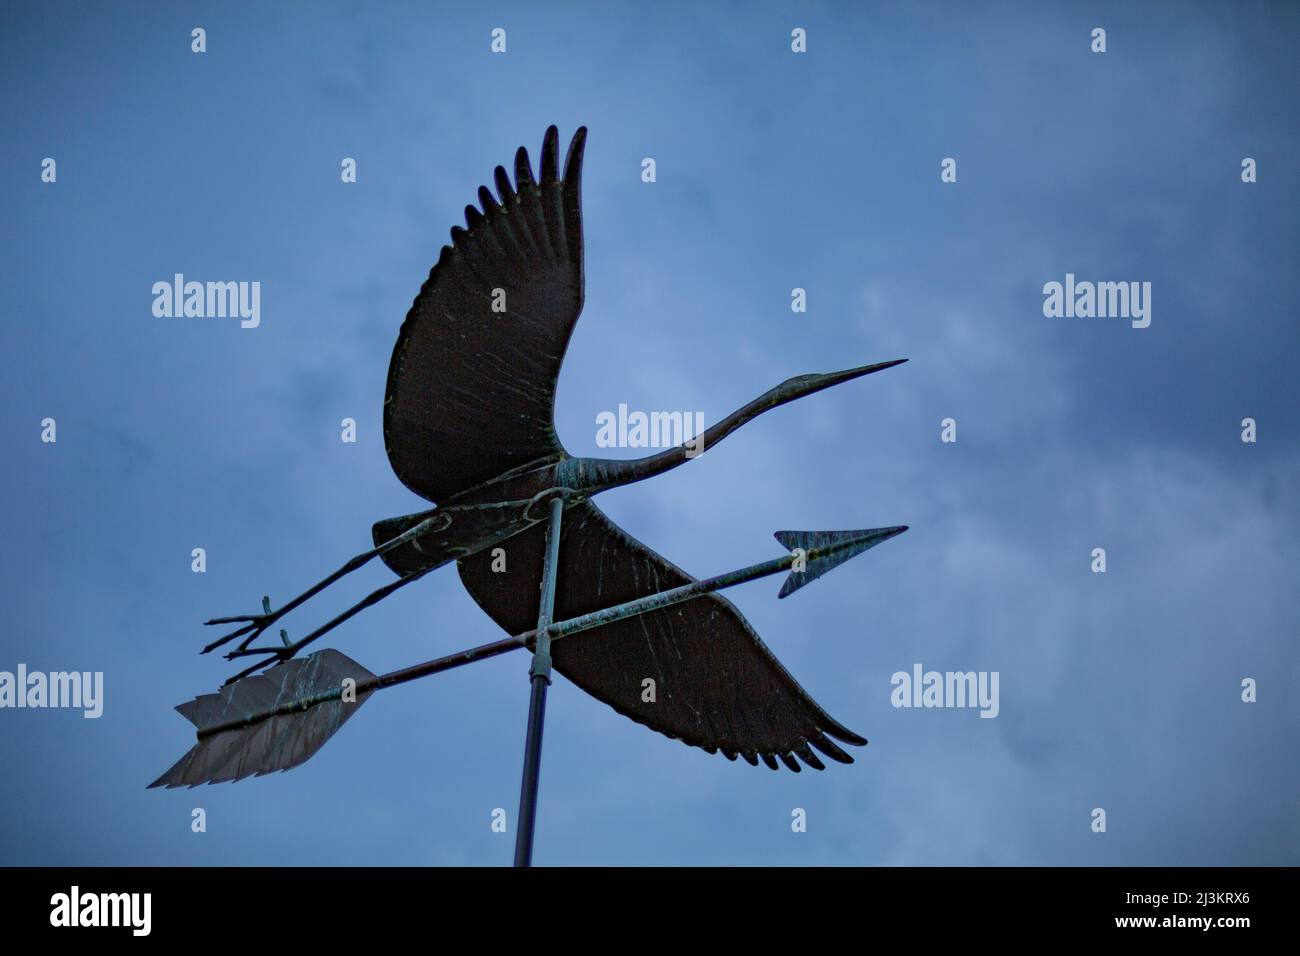 Close-up low angle view of a metal wind vane in bird likeness against a cloudy sky; Vancouver, British Columbia, Canada Stock Photo